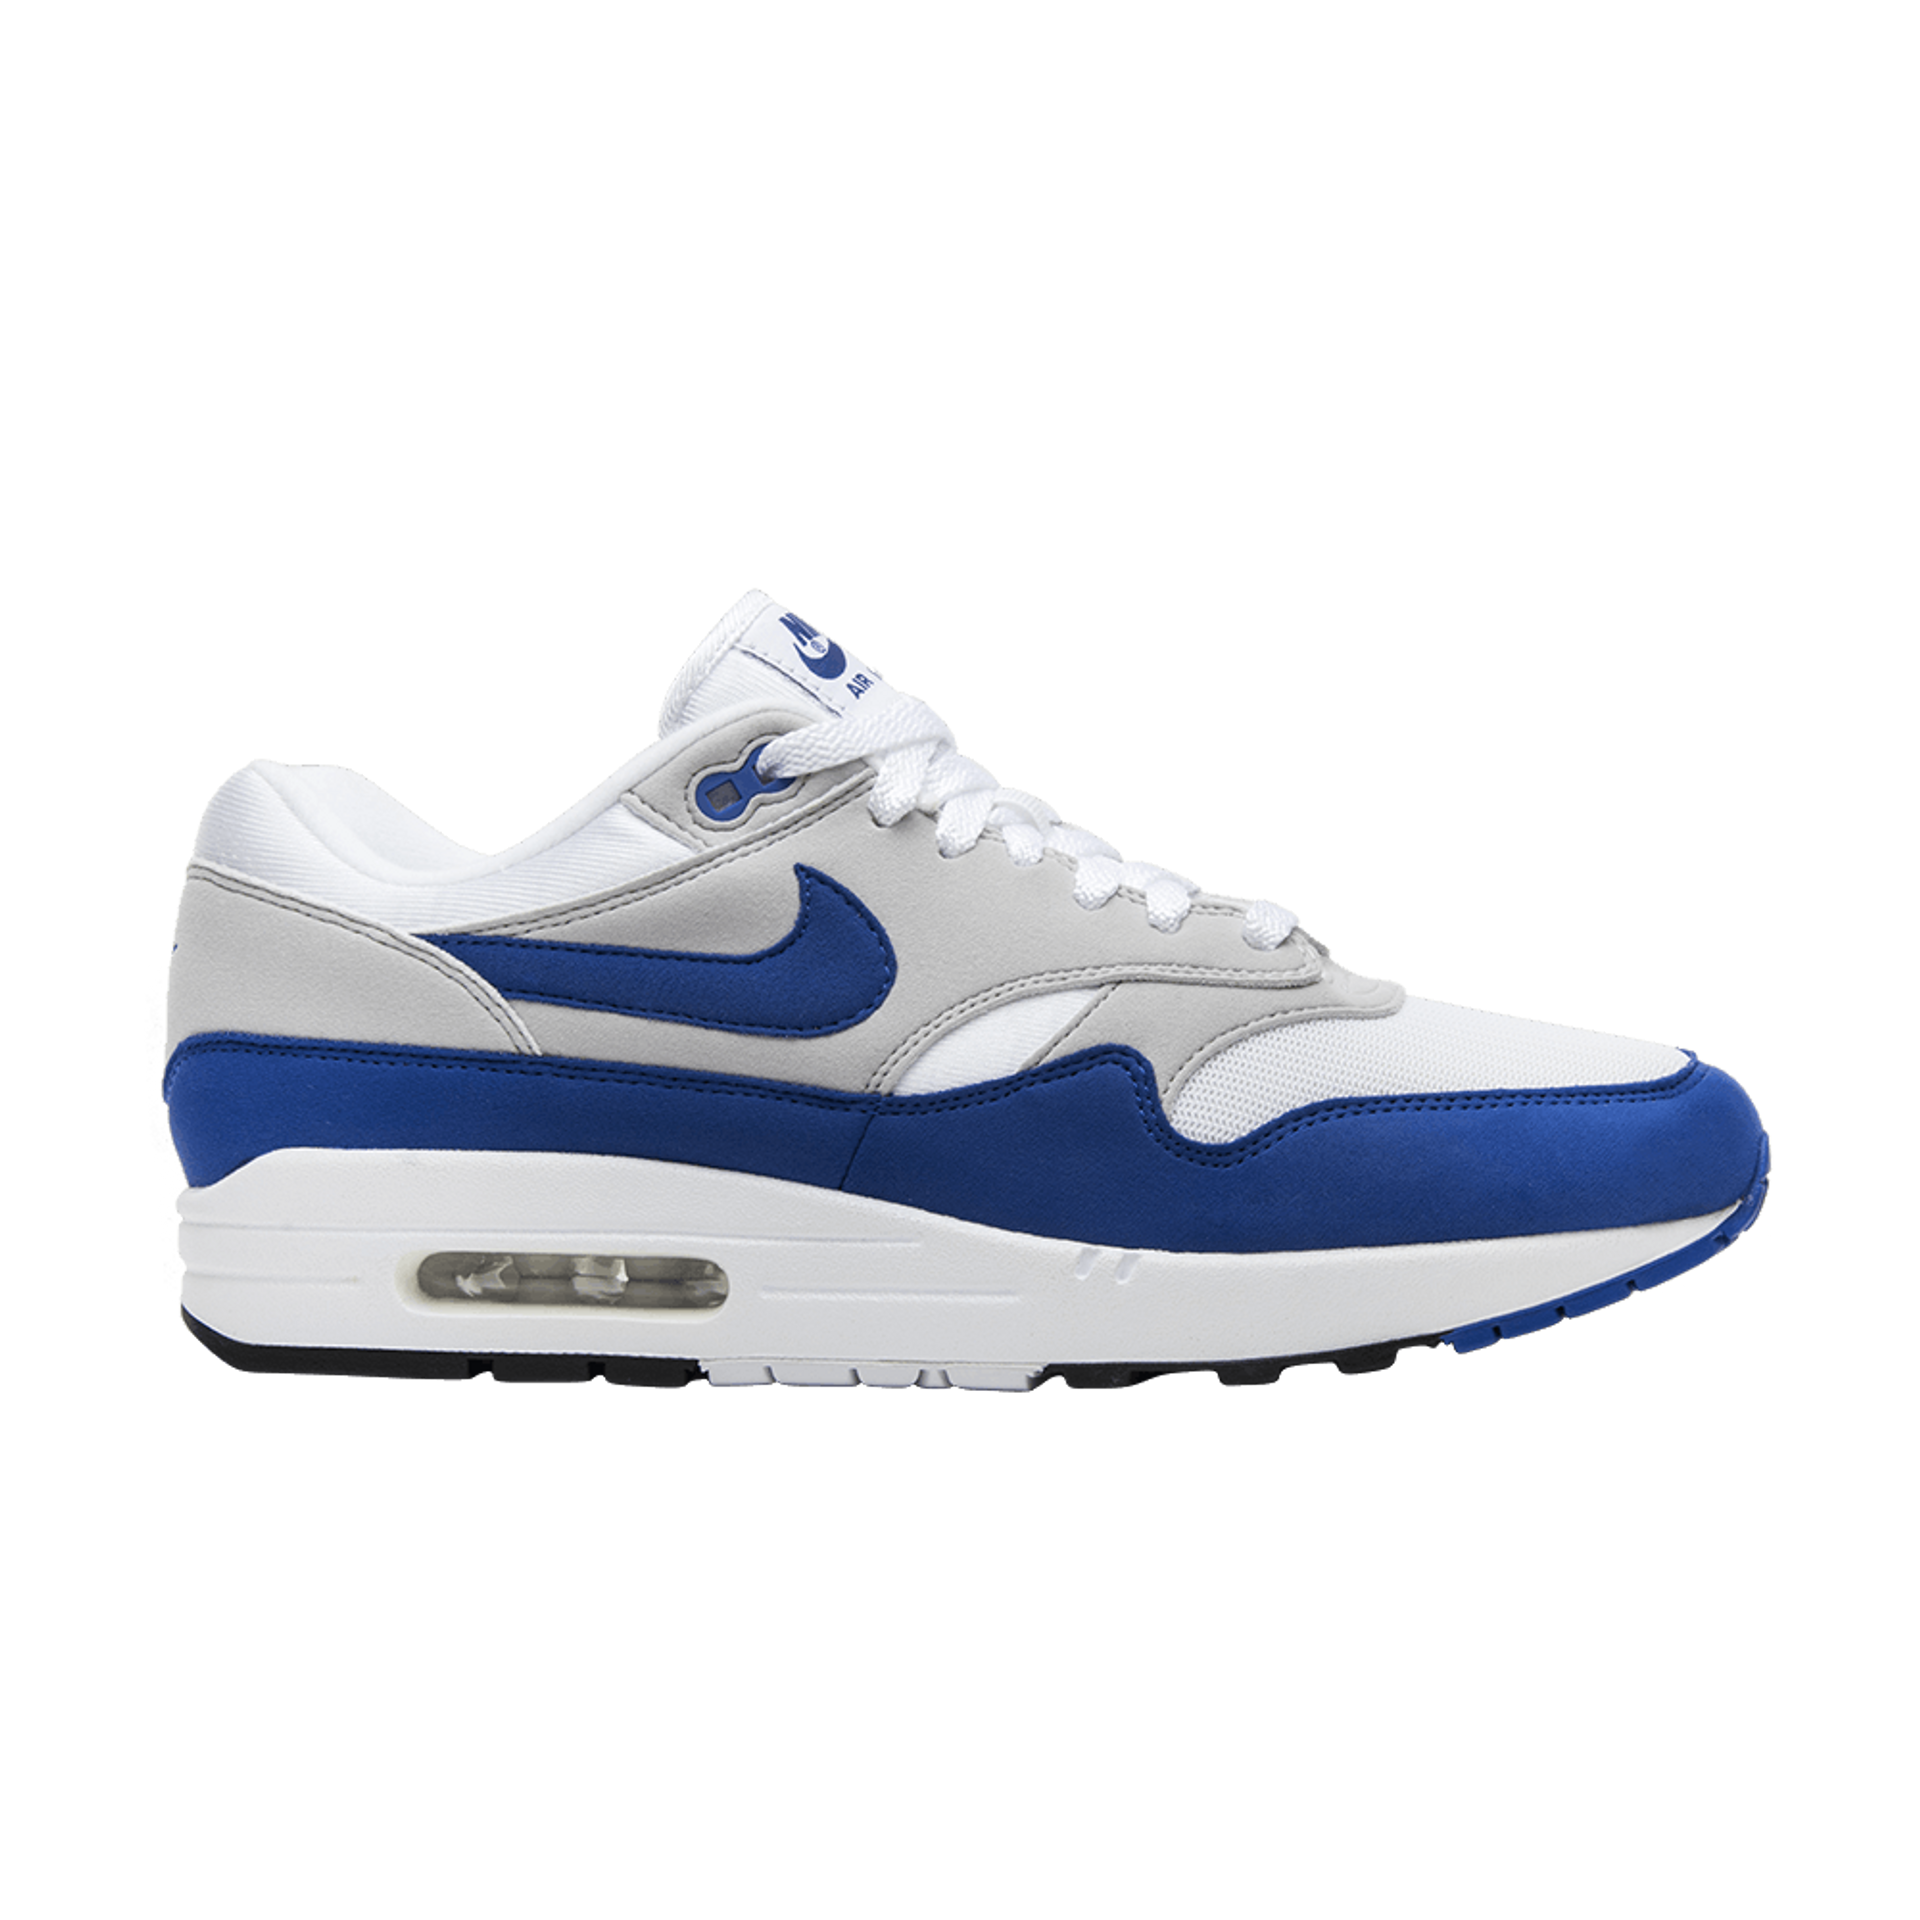 Nike Air Max 1 OG 'Anniversary' 2017 Re-release